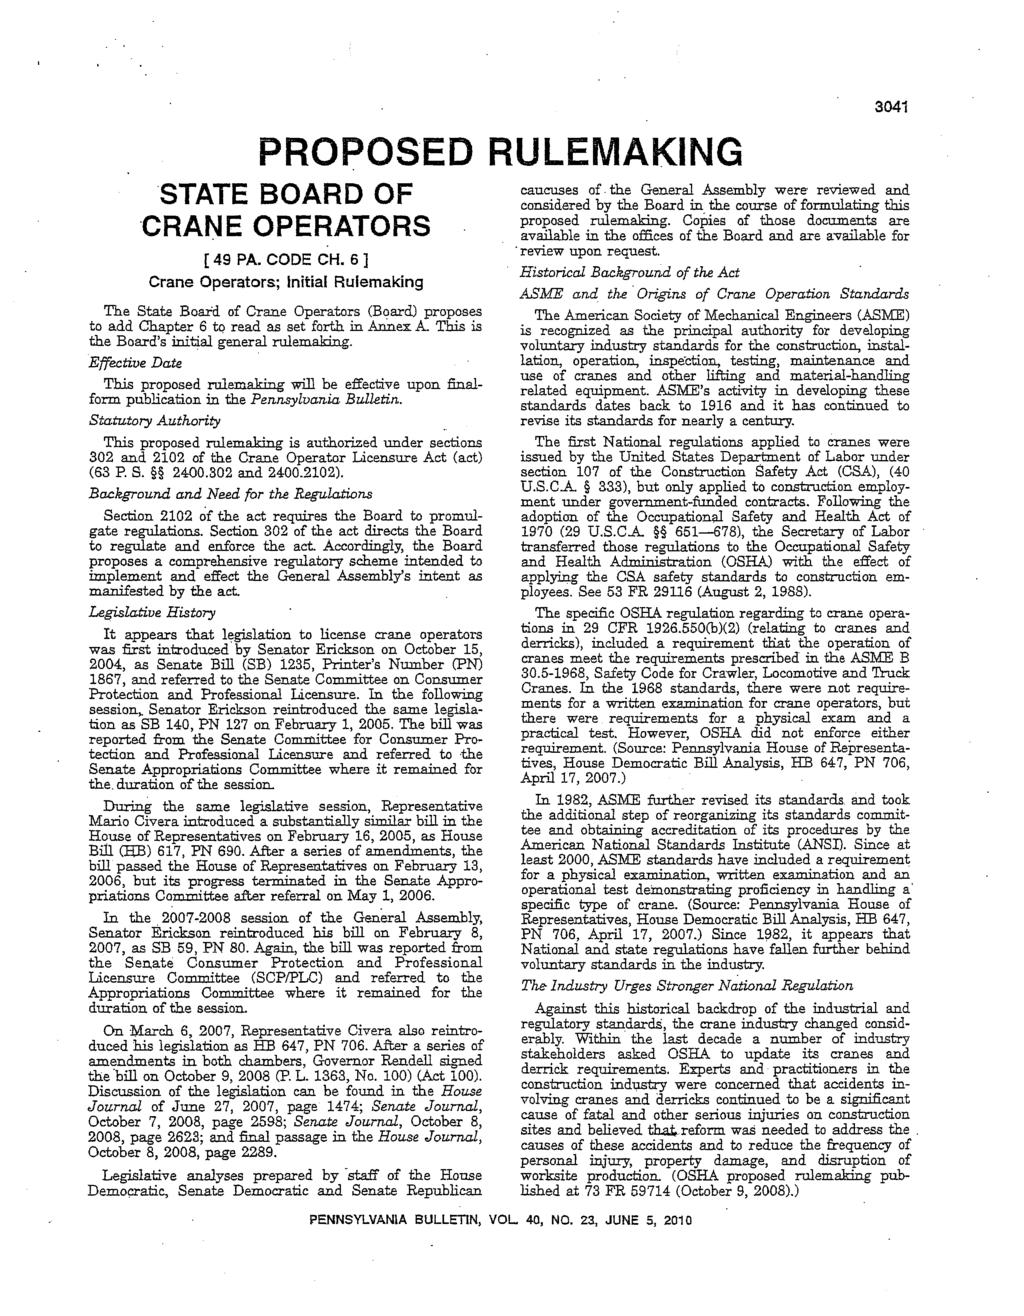 PROPOSED RULEMAKiNG STATE BOARD OF CRANE OPERATORS [ 49 PA. CODE CH.